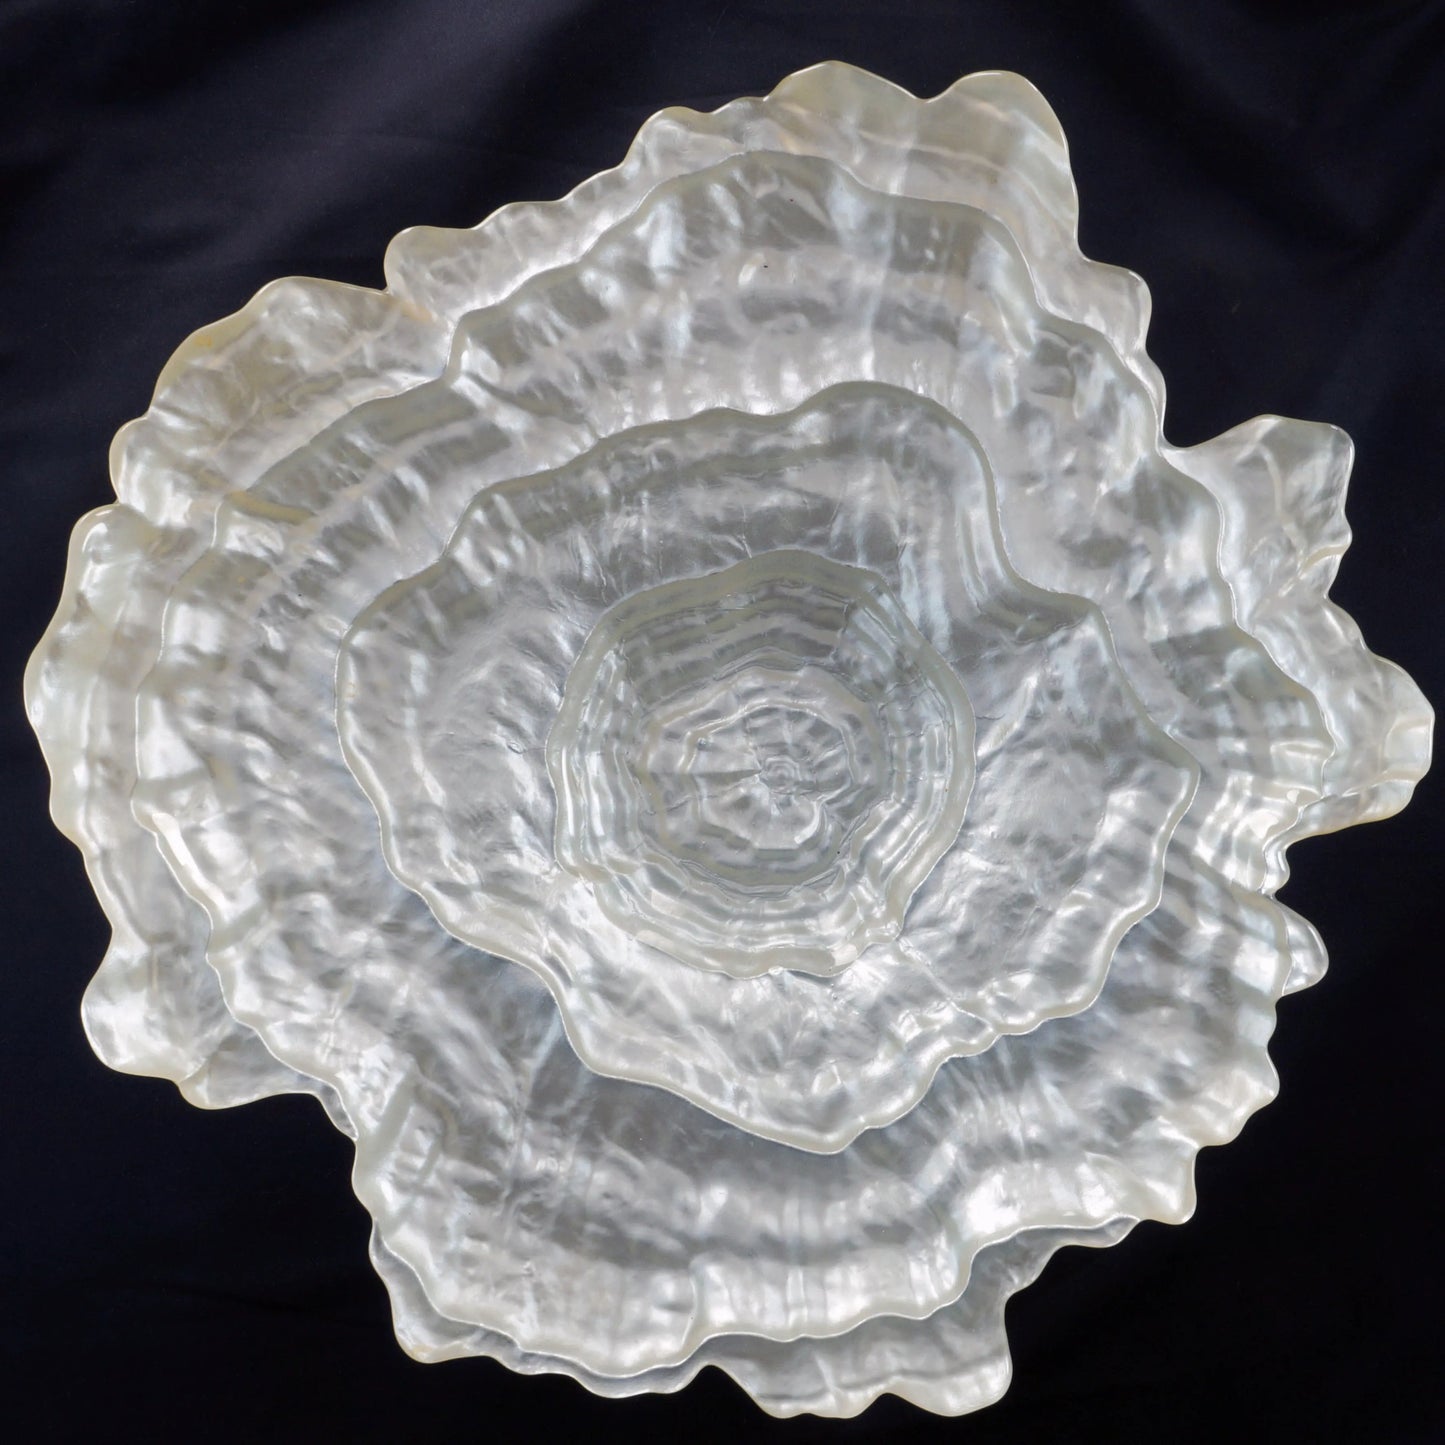 Large Vintage Art Glass Oyster Shaped Centerpiece Shallow Bowl Late 20th C - Bear and Raven Antiques